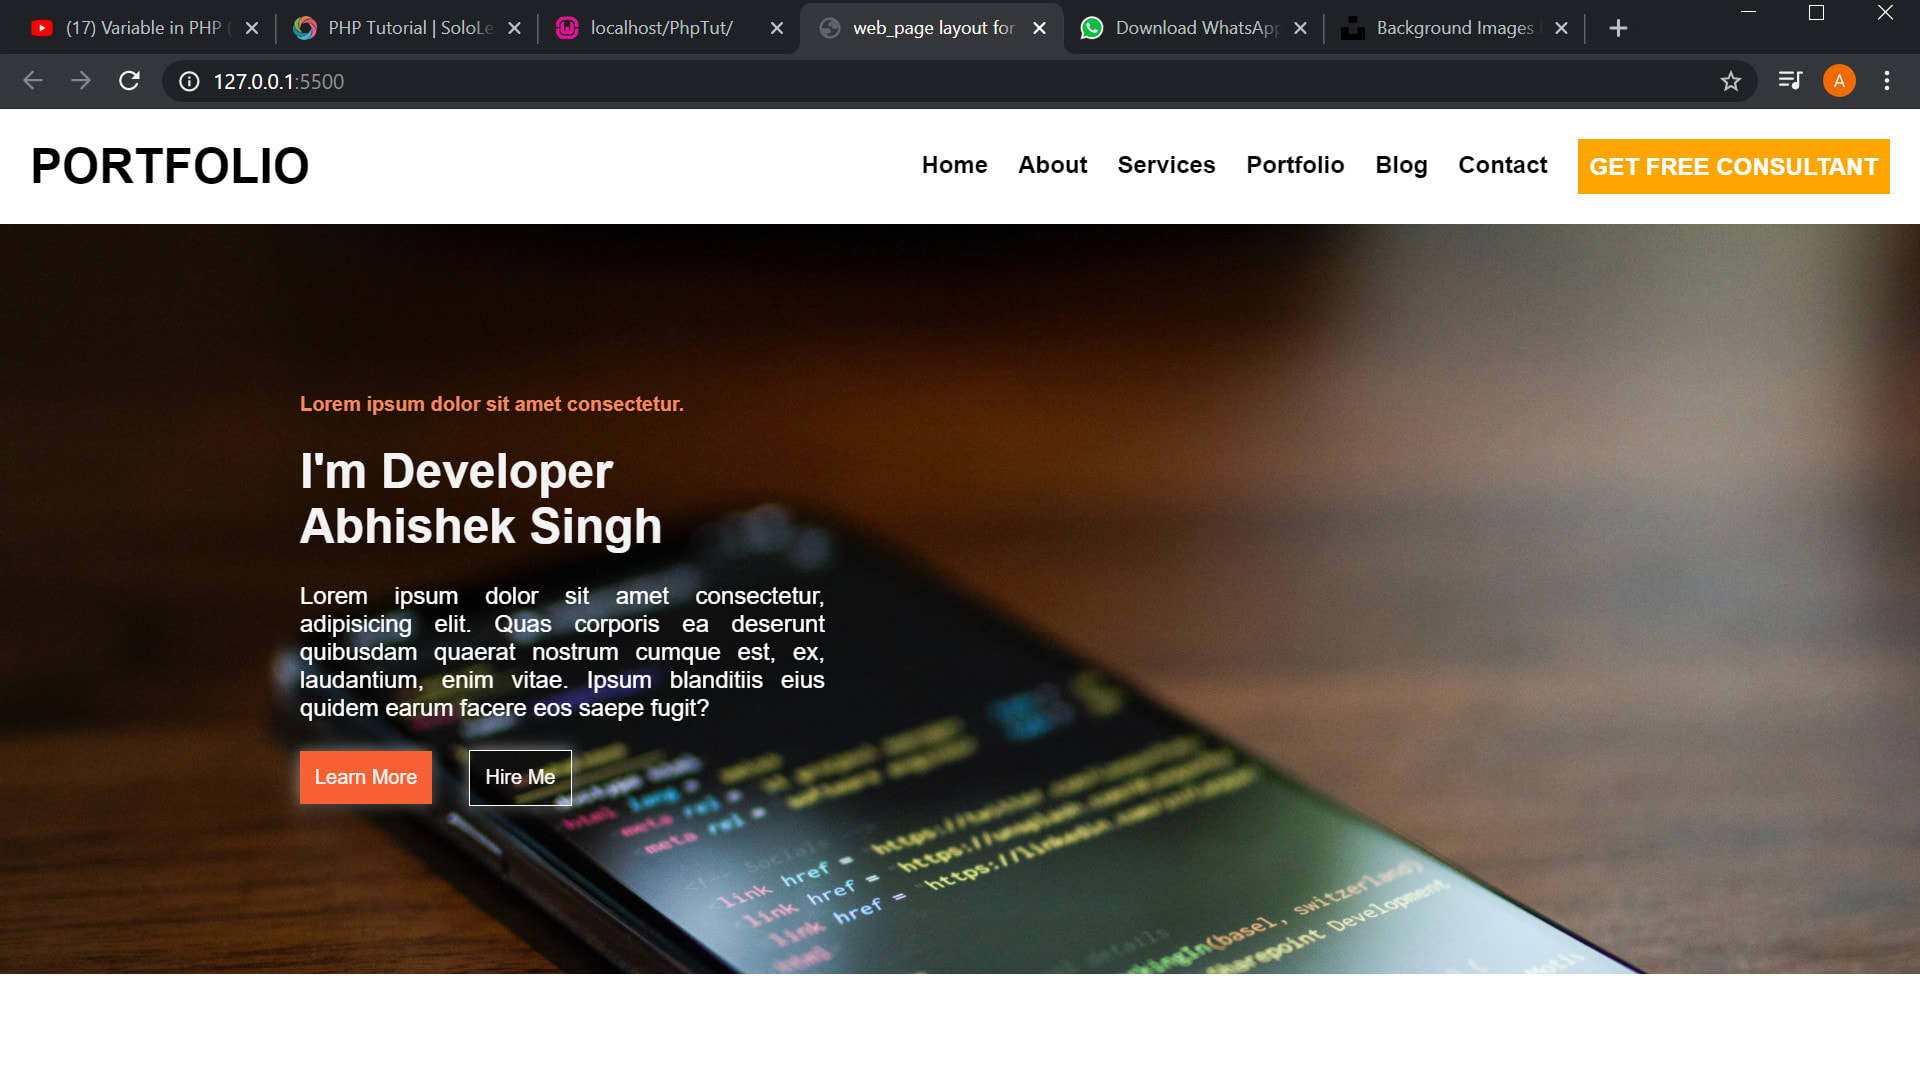 Responsive web page and css javascript animation by Abhik30 | Fiverr